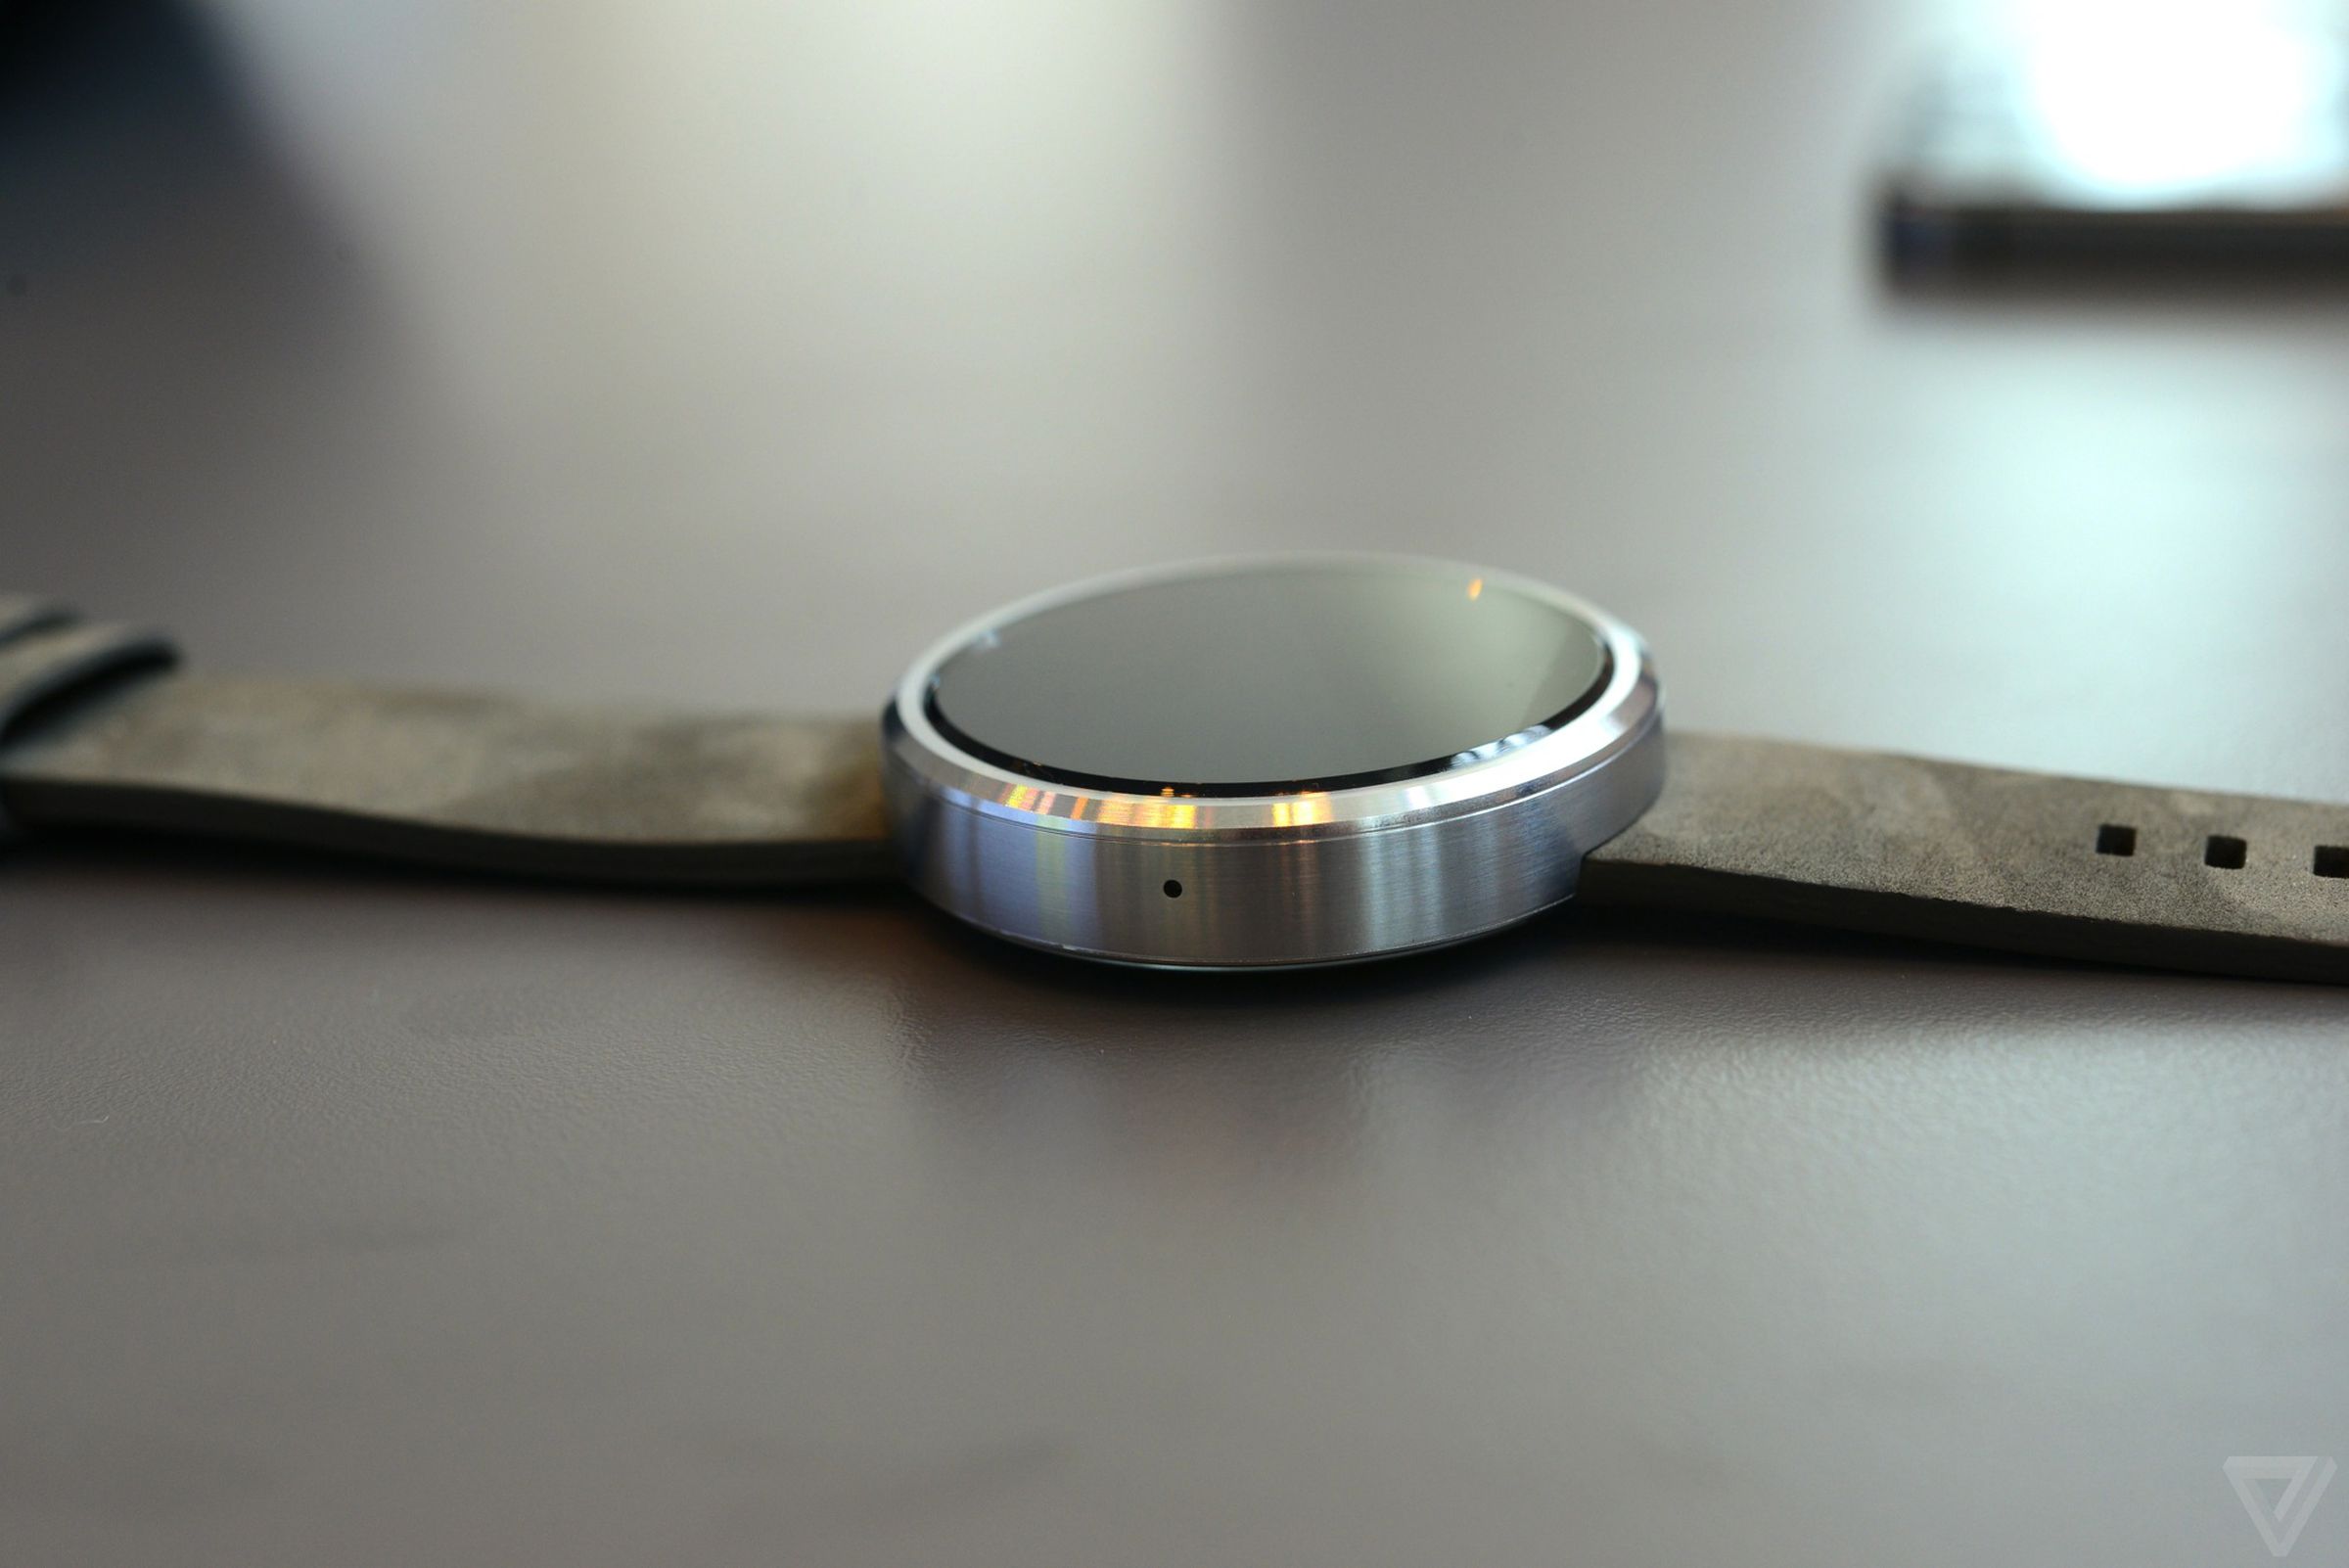 Moto 360 hands-on pictures